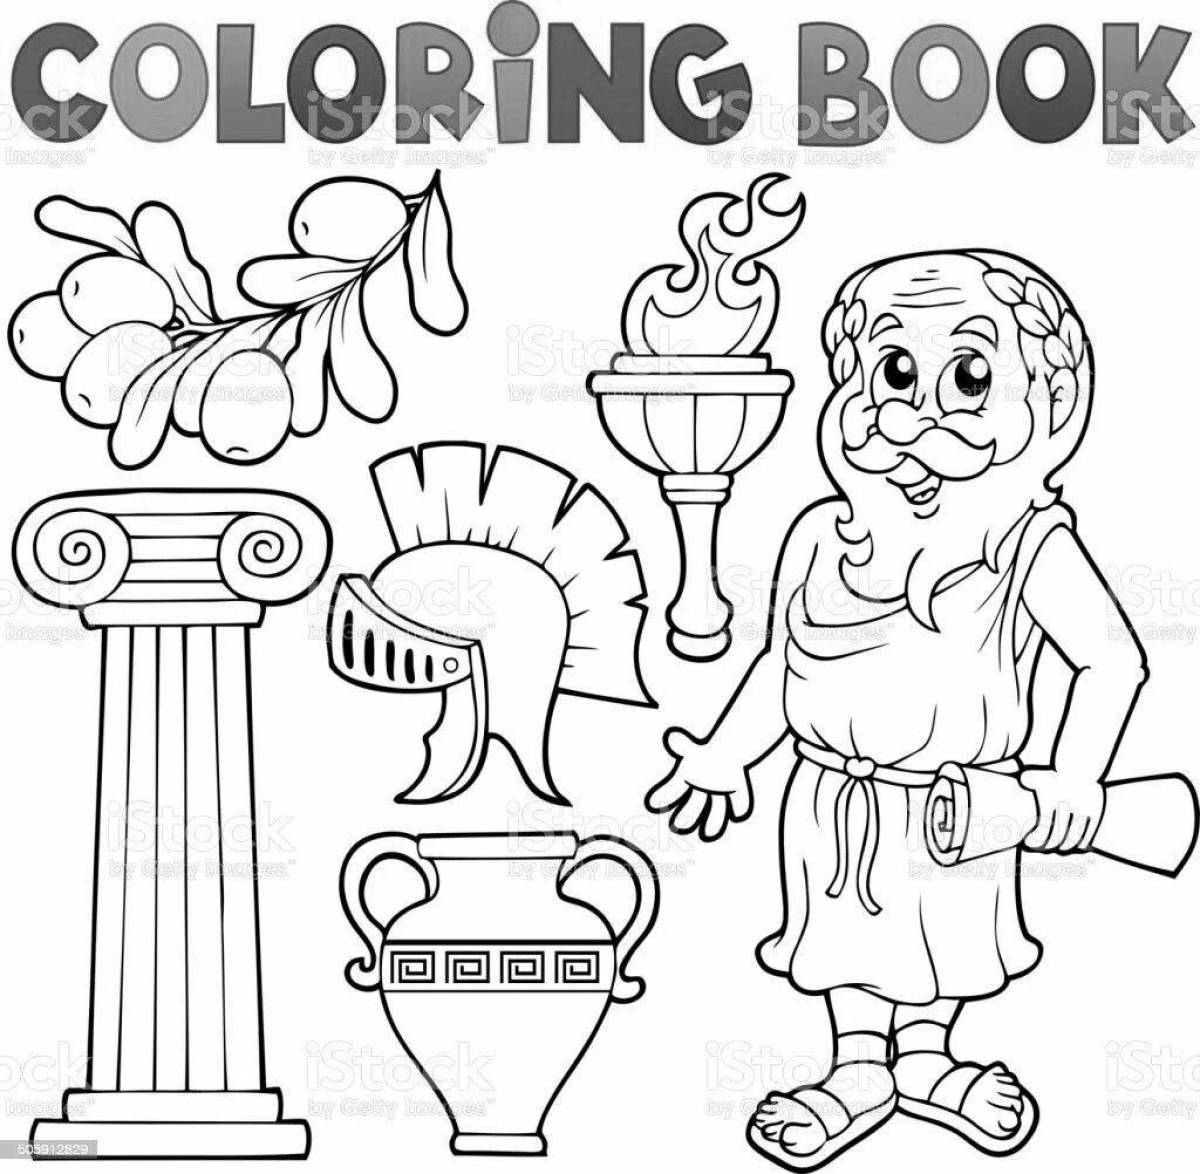 Exquisite ancient greece coloring book for kids